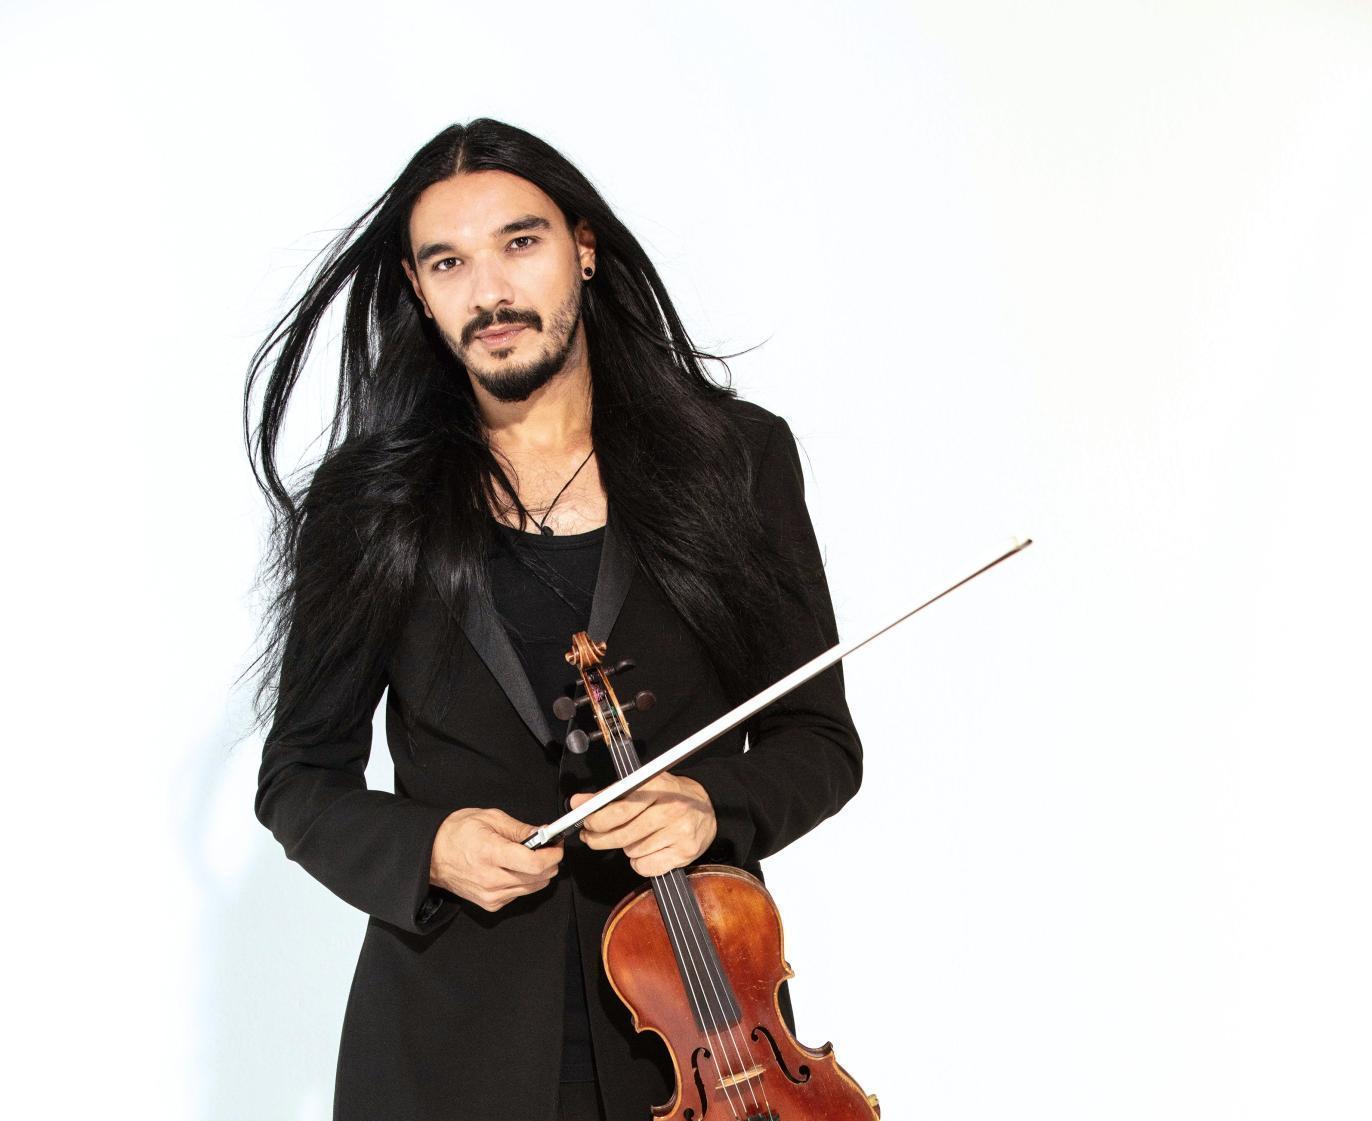 Violinist Nemanja Radulovic faces the camera head on, holding his instrument and bow in his hand